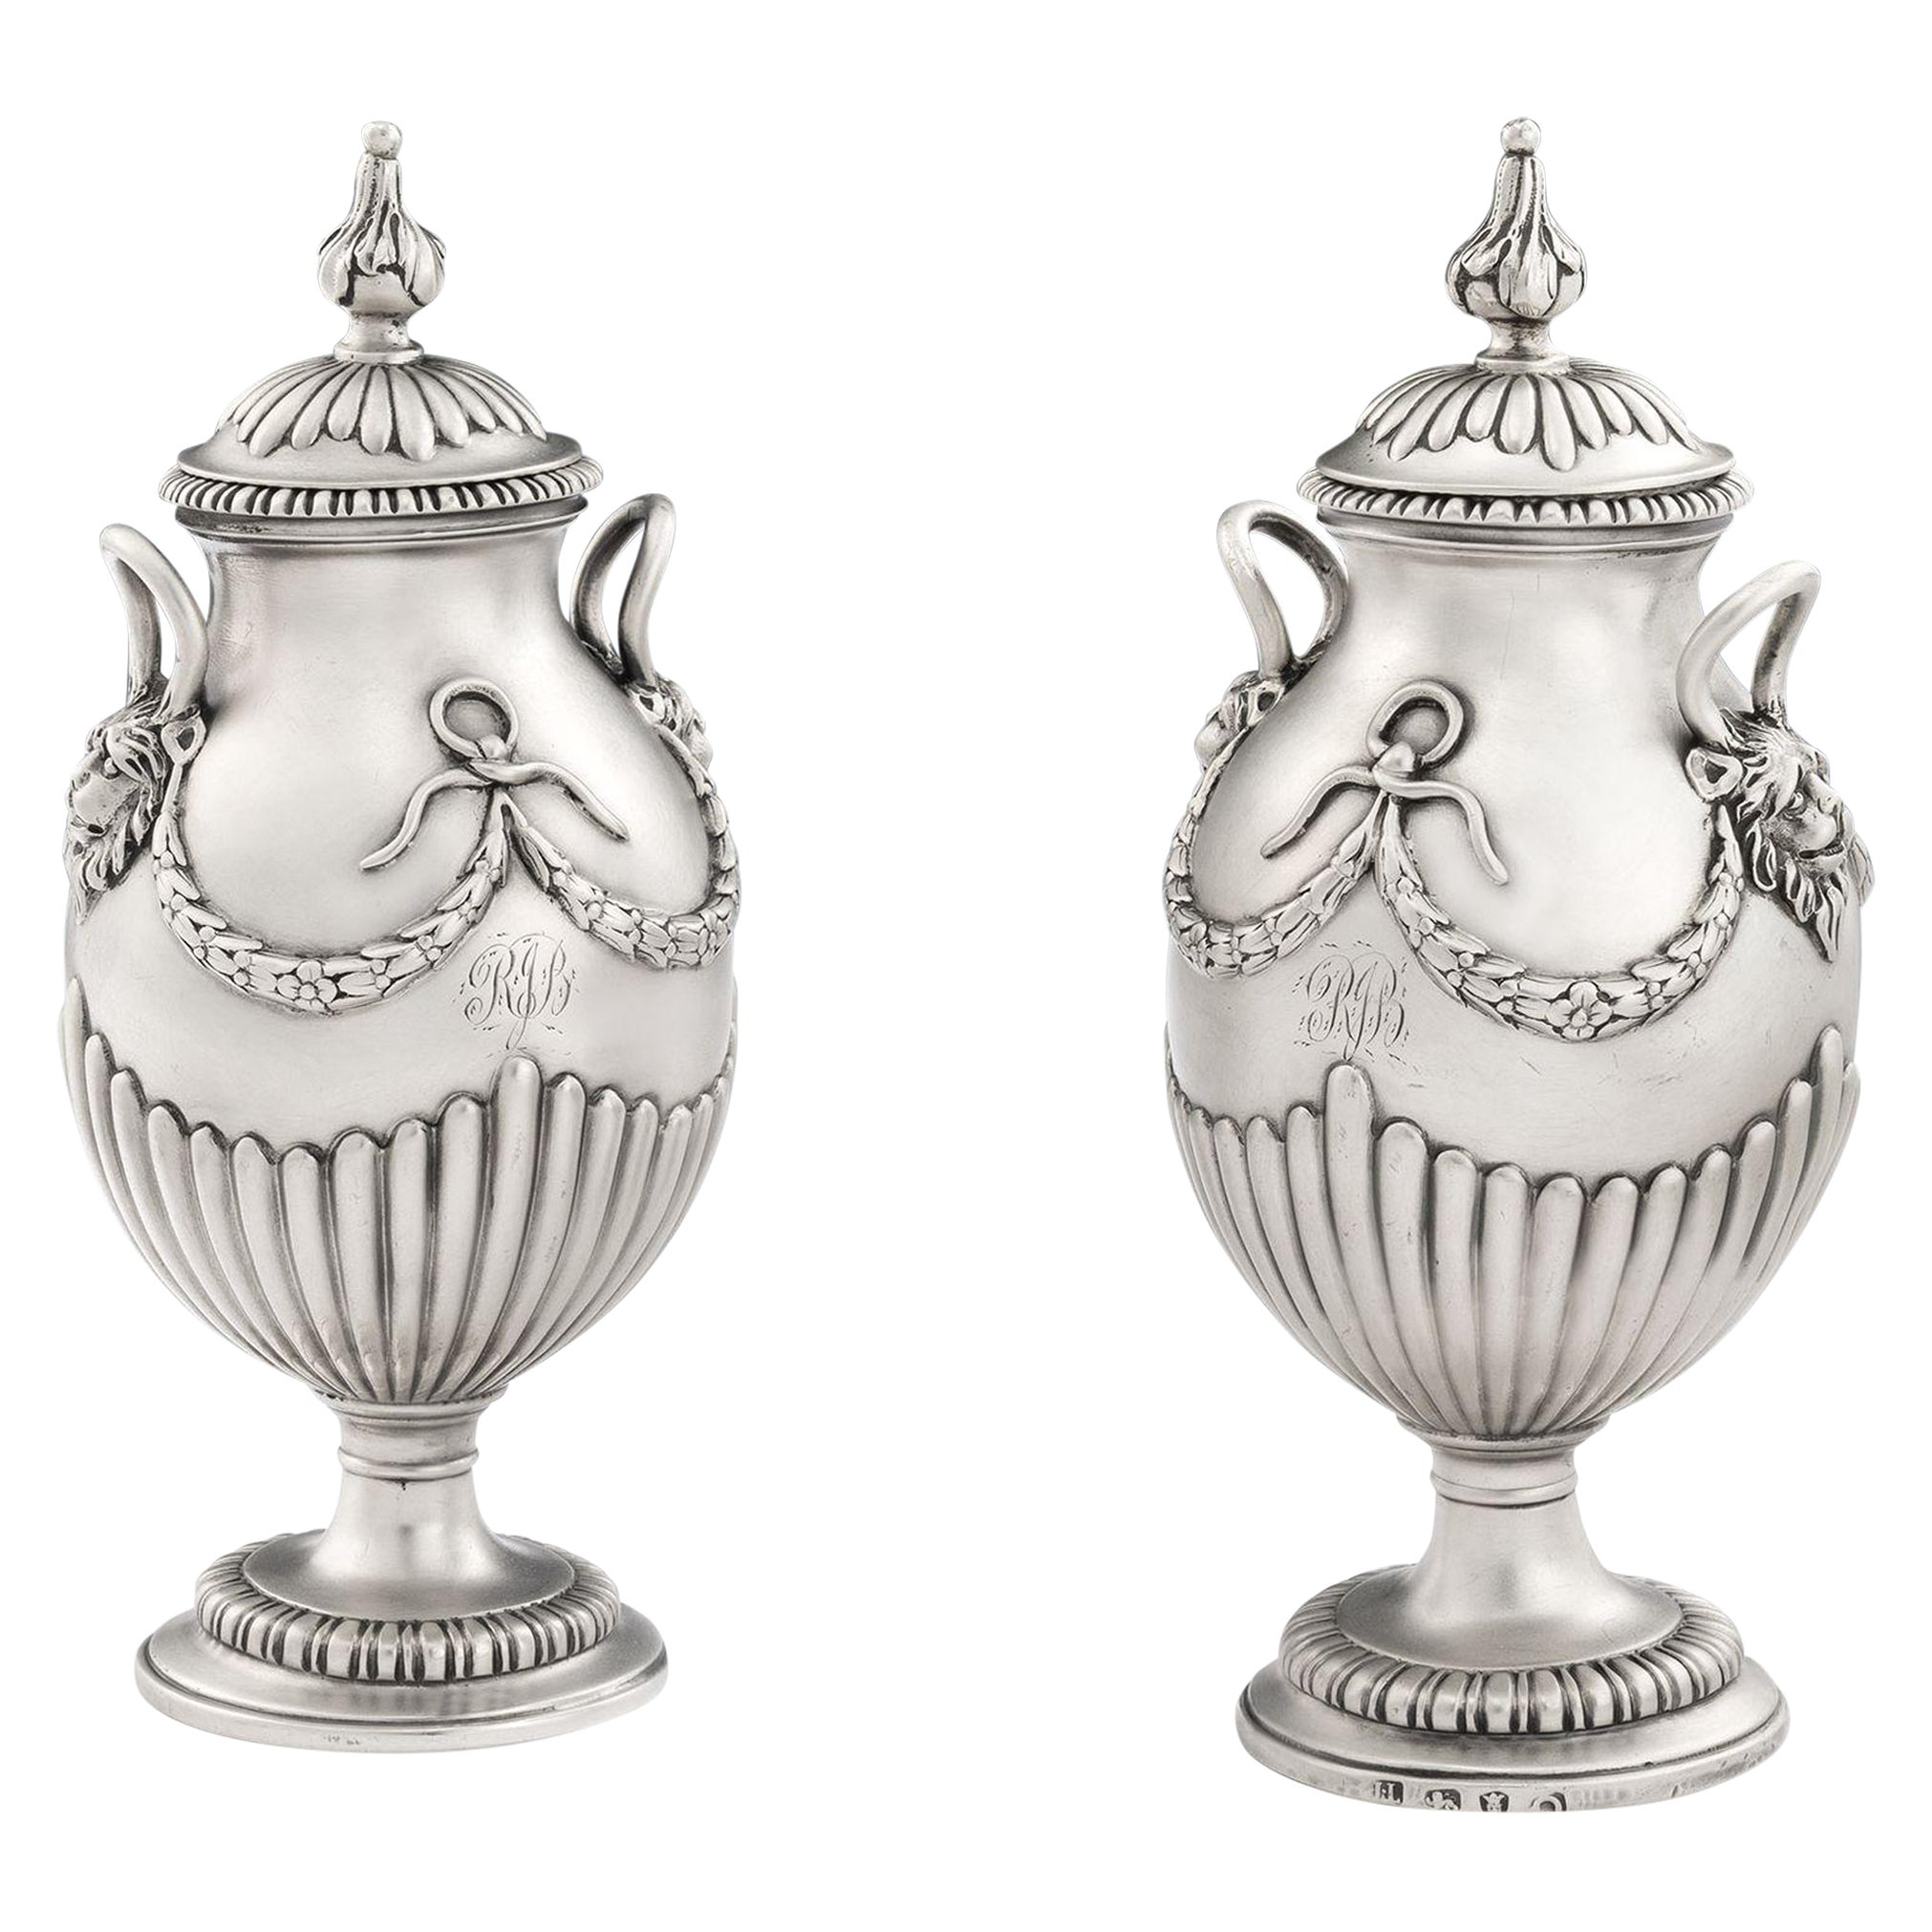 Pair of George III Neo Classical Vases by Thomas Pitts I, 1771